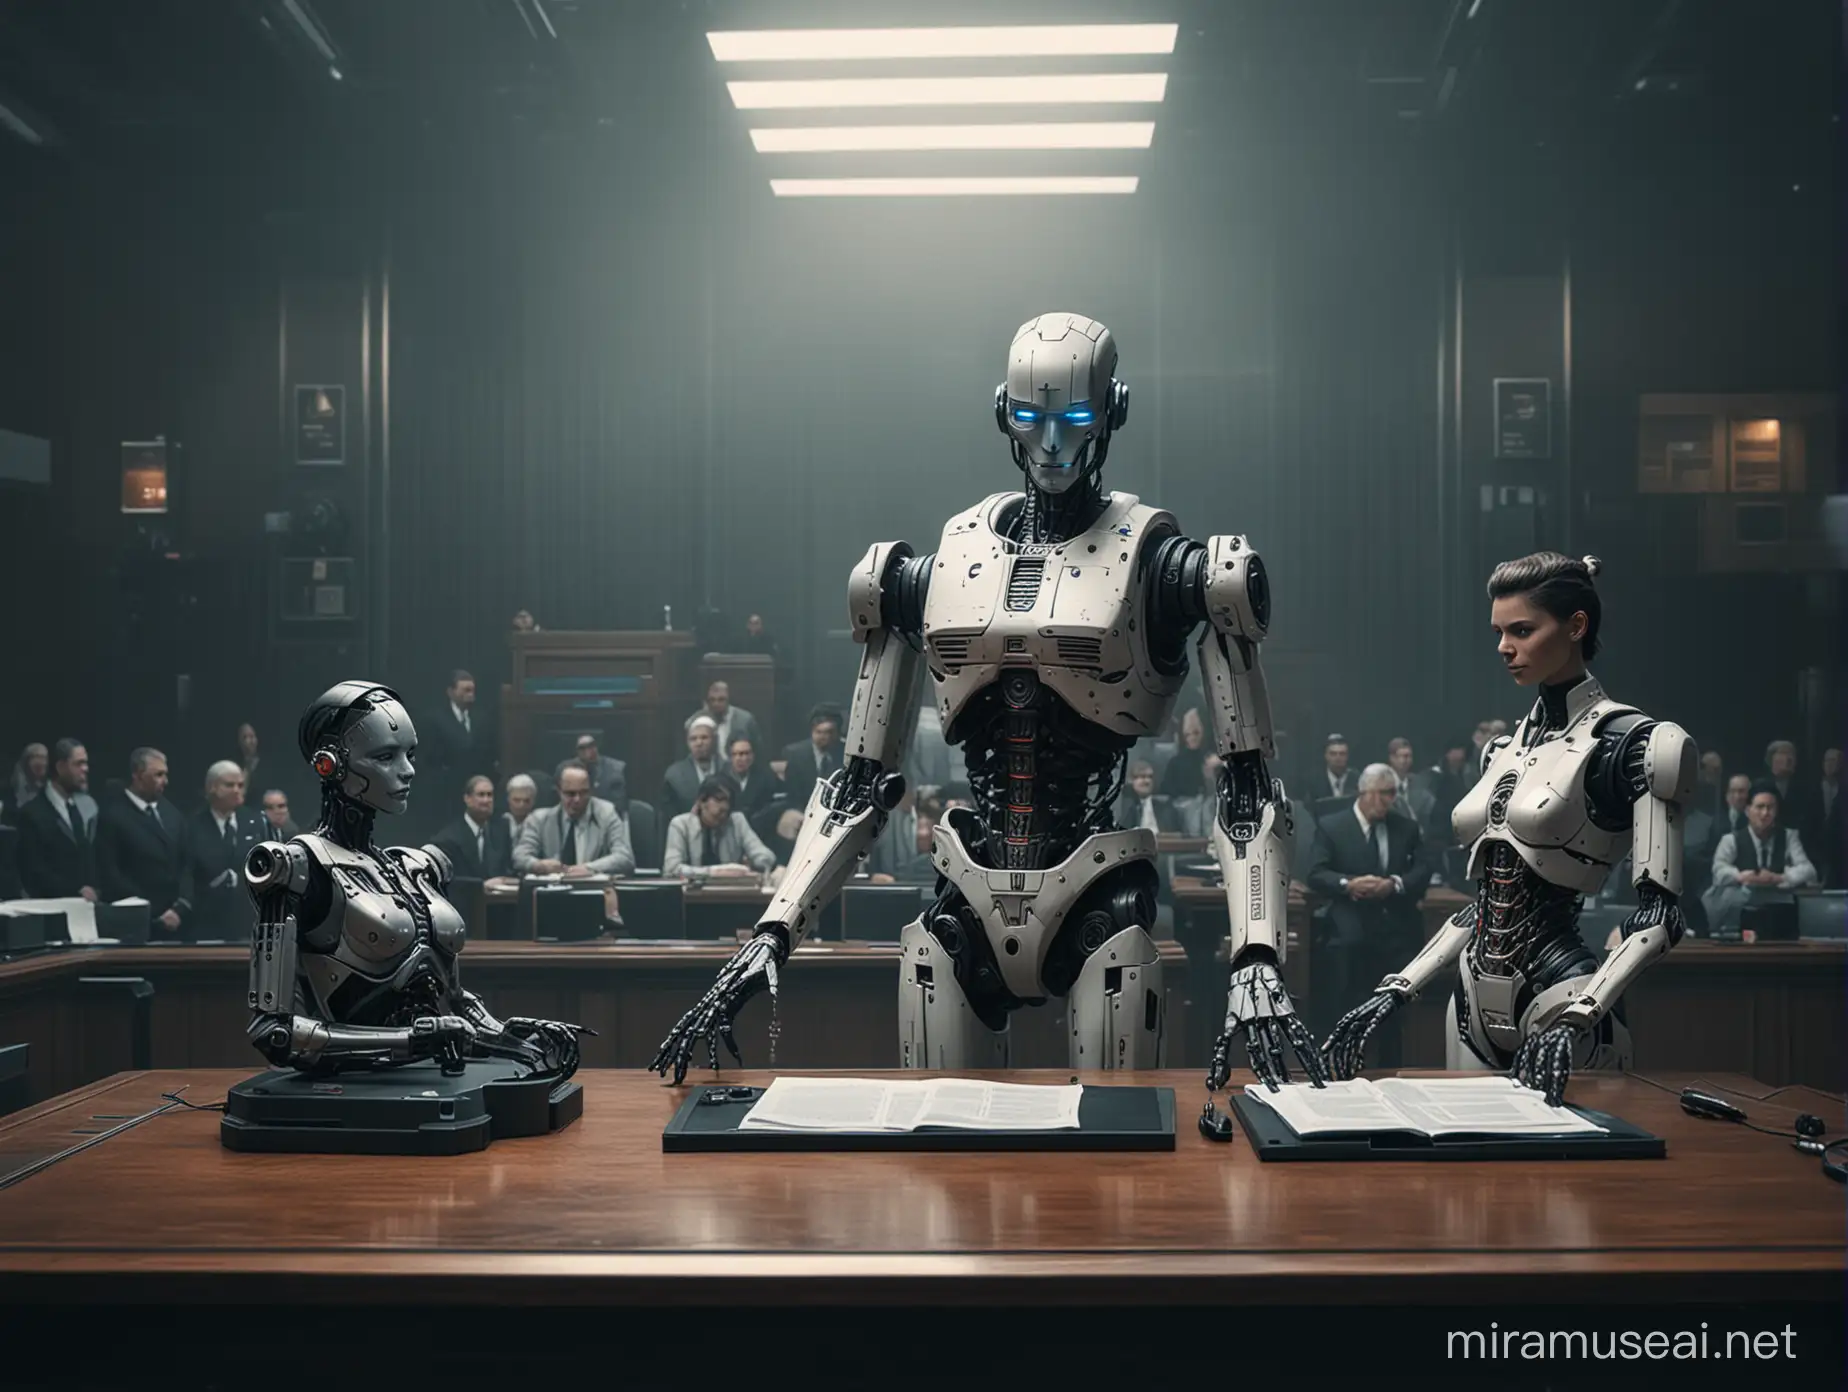 Futuristic Cyberpunk Courtroom Scene with Robot Judge Putting Human Doctor on Trial